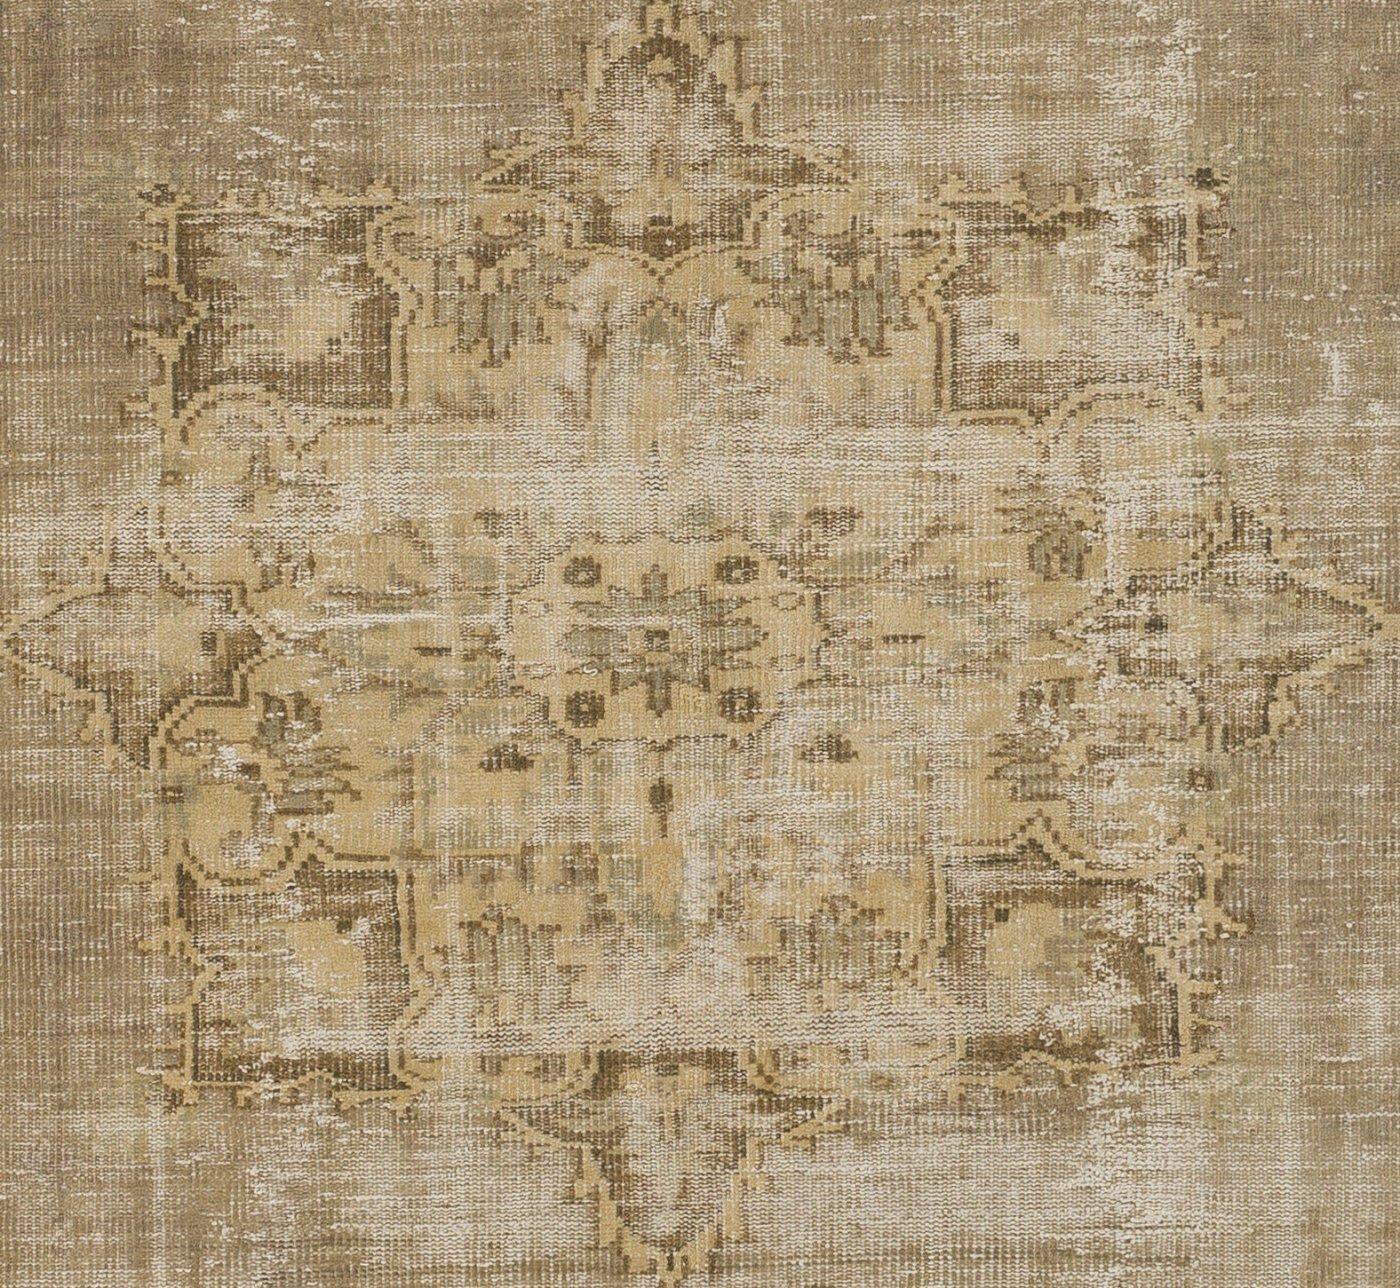 7.2x10 Ft Vintage Distressed Hand-Knotted Turkish Oushak Rug in Sand and Taupe In Good Condition For Sale In Philadelphia, PA